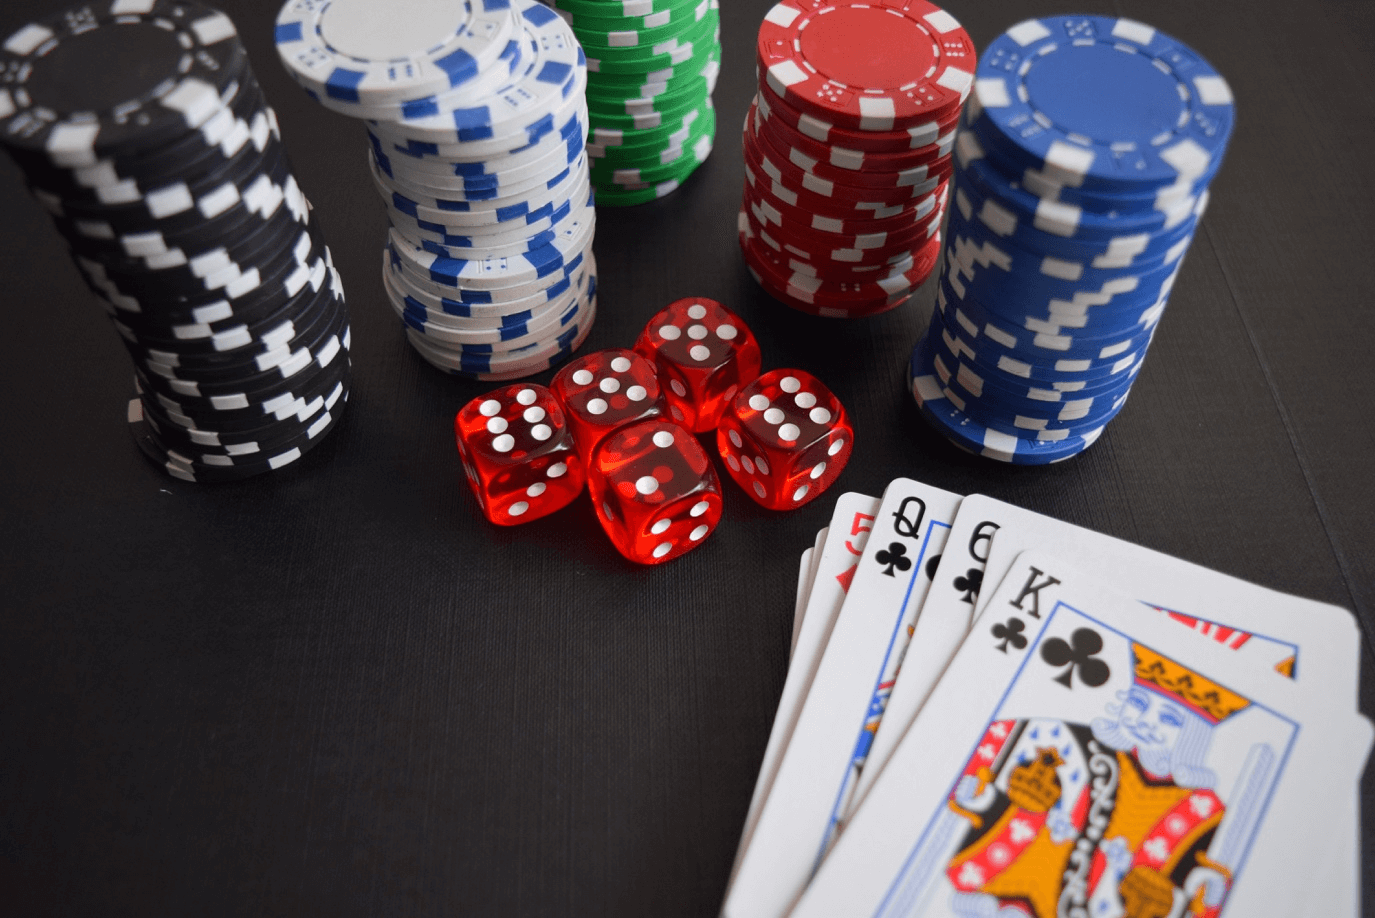 What Are The Ways To Check Whether Online Gambling Sites Are Safe And Secure?